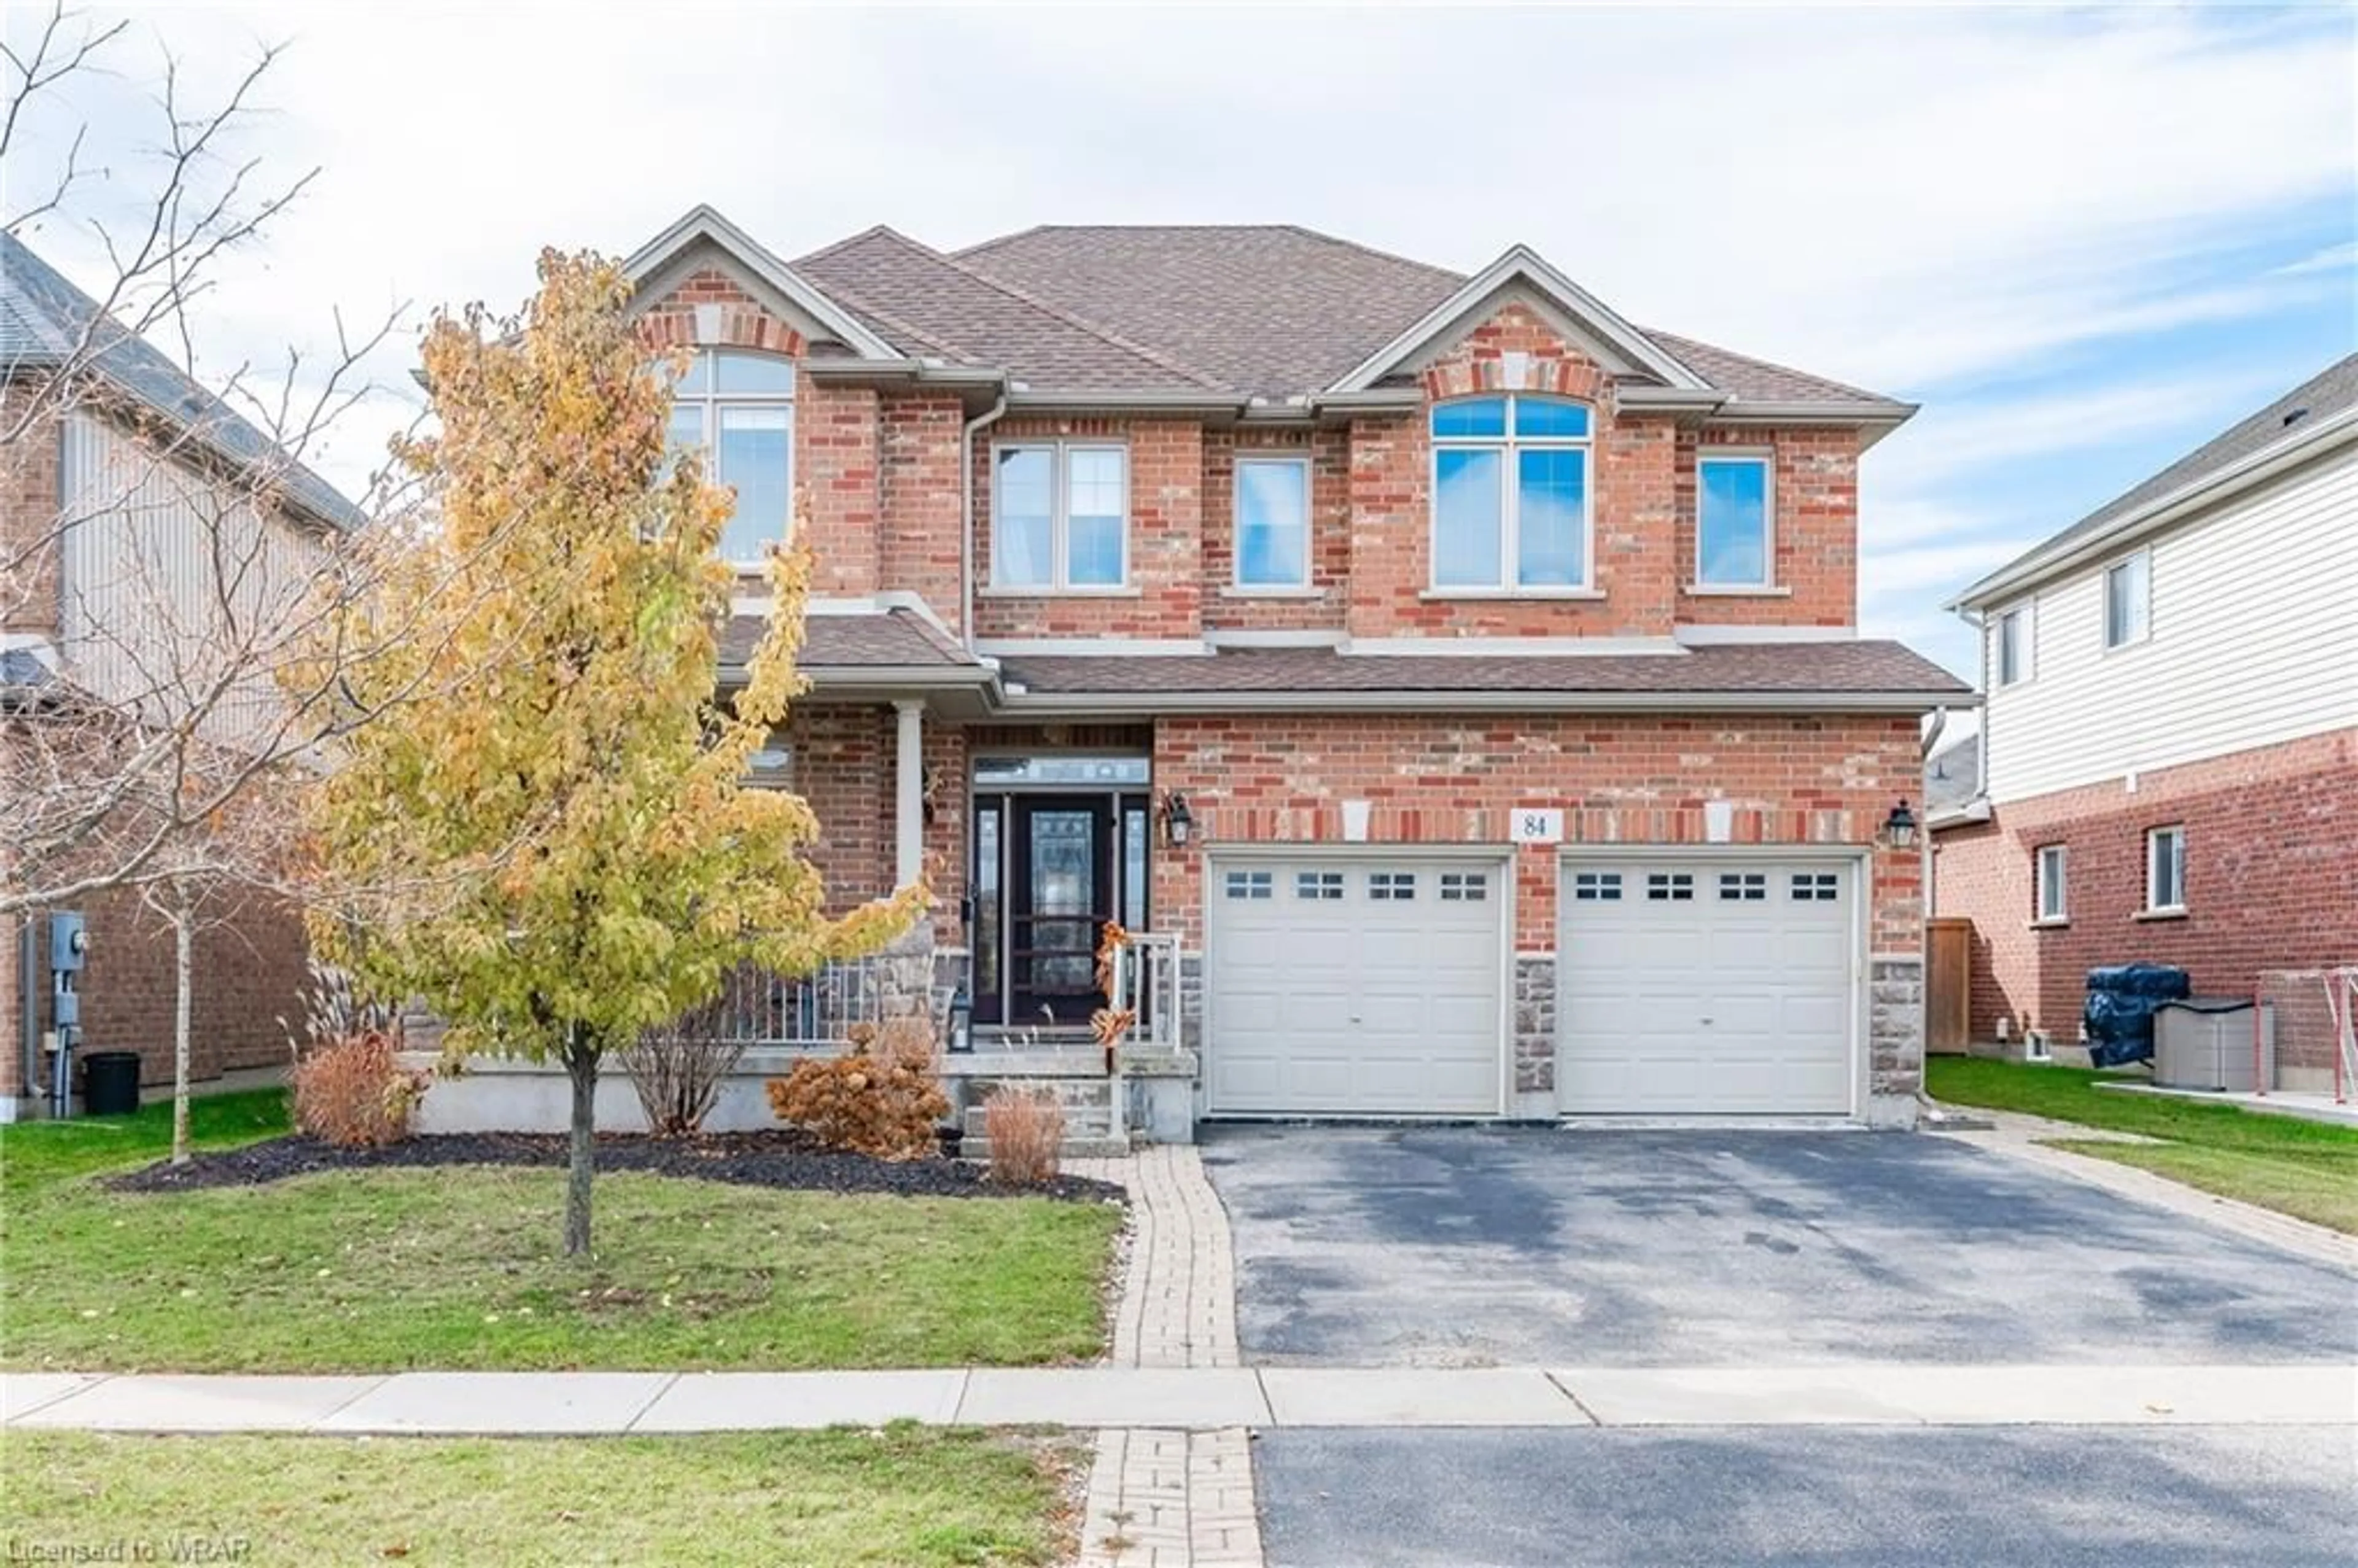 Home with brick exterior material for 84 Hunsberger Dr, Baden Ontario N3A 4S5